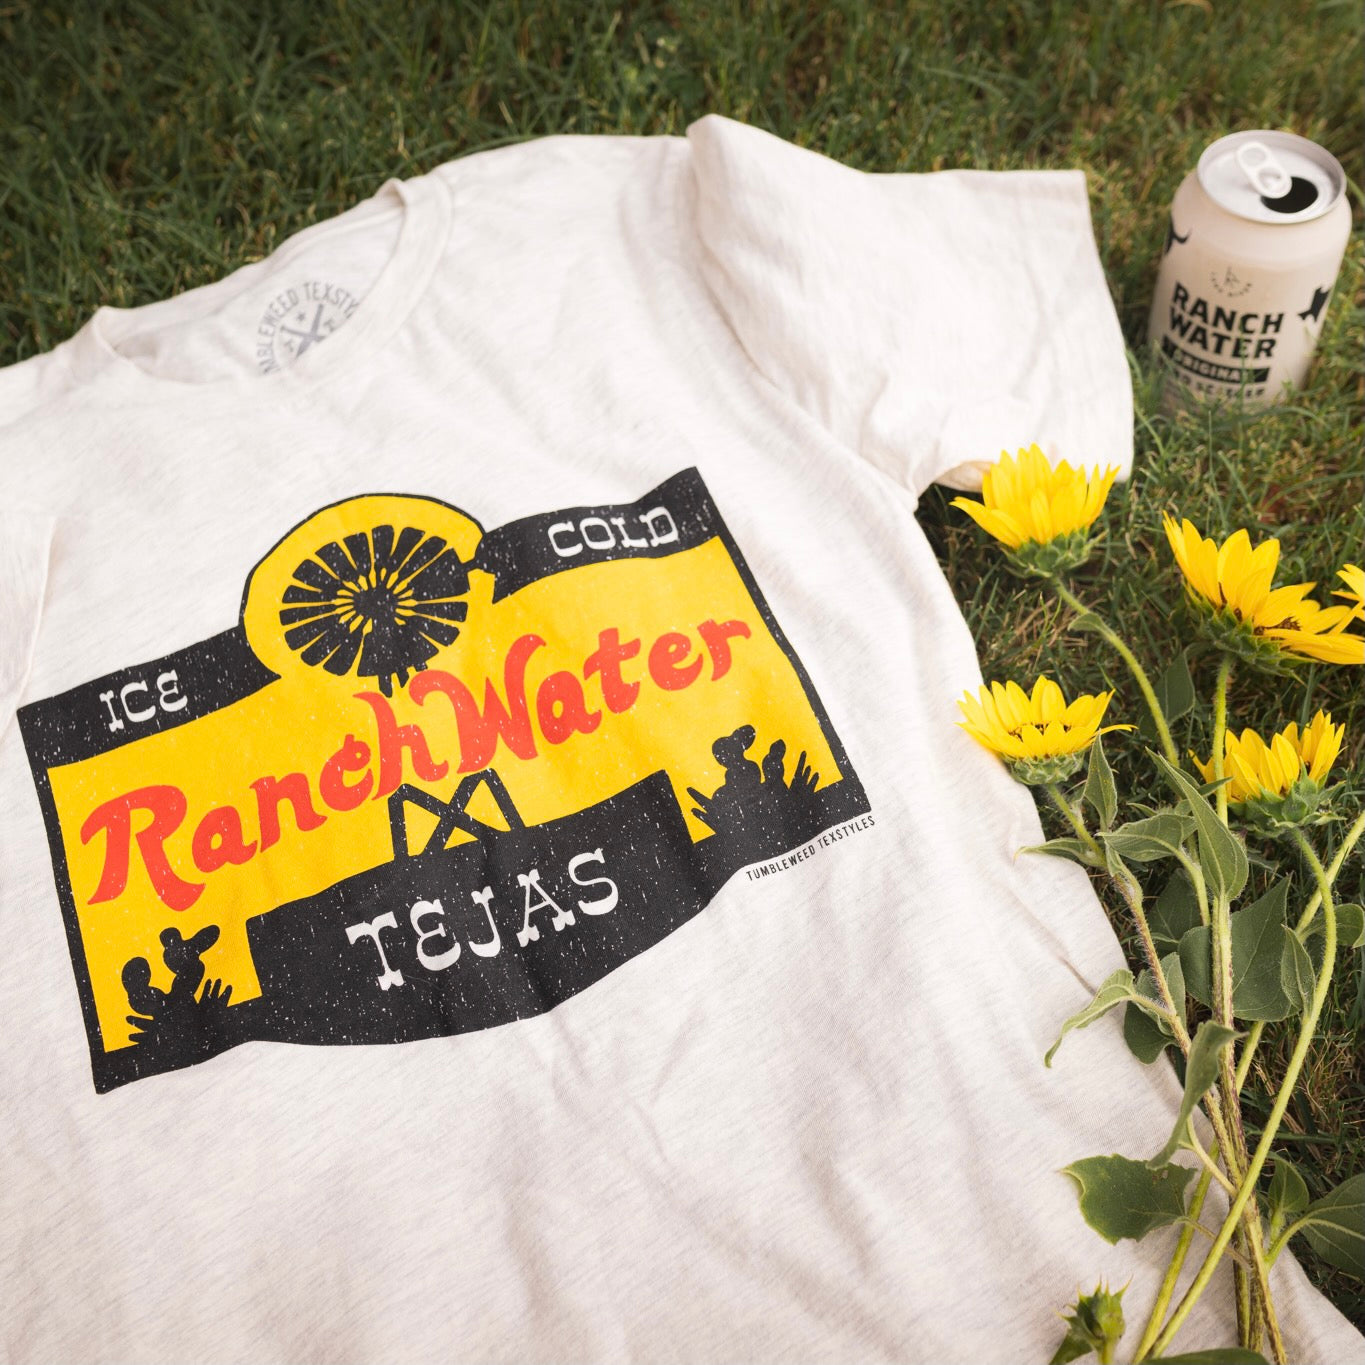 Ranch Water Label T-Shirt